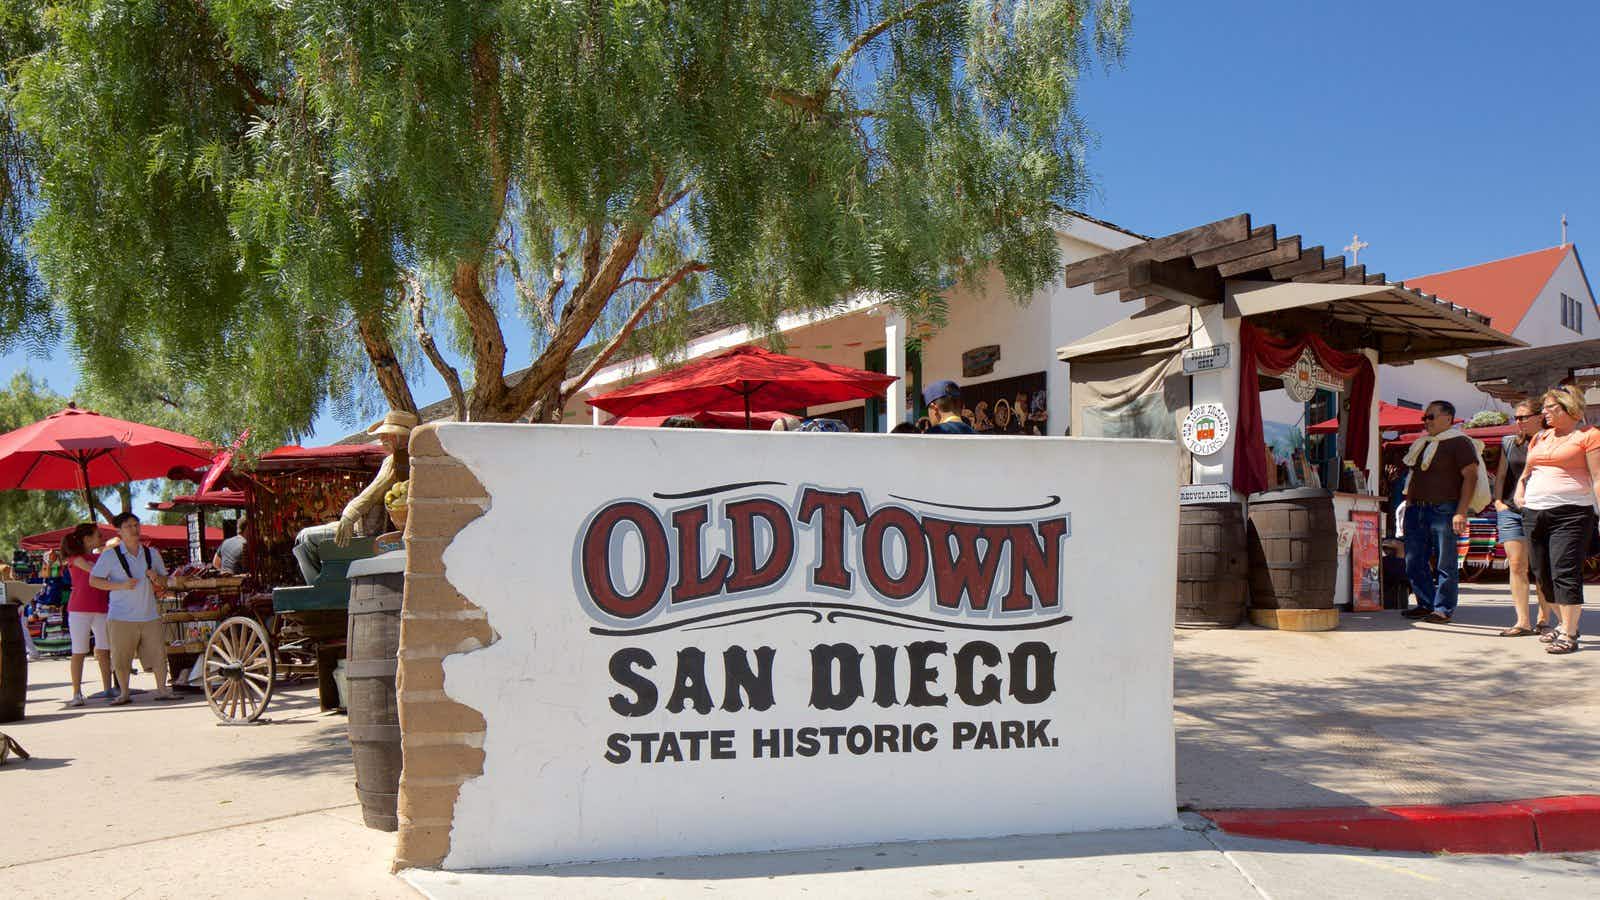 Free Things to Do in San Diego: Old Town State Historical Park